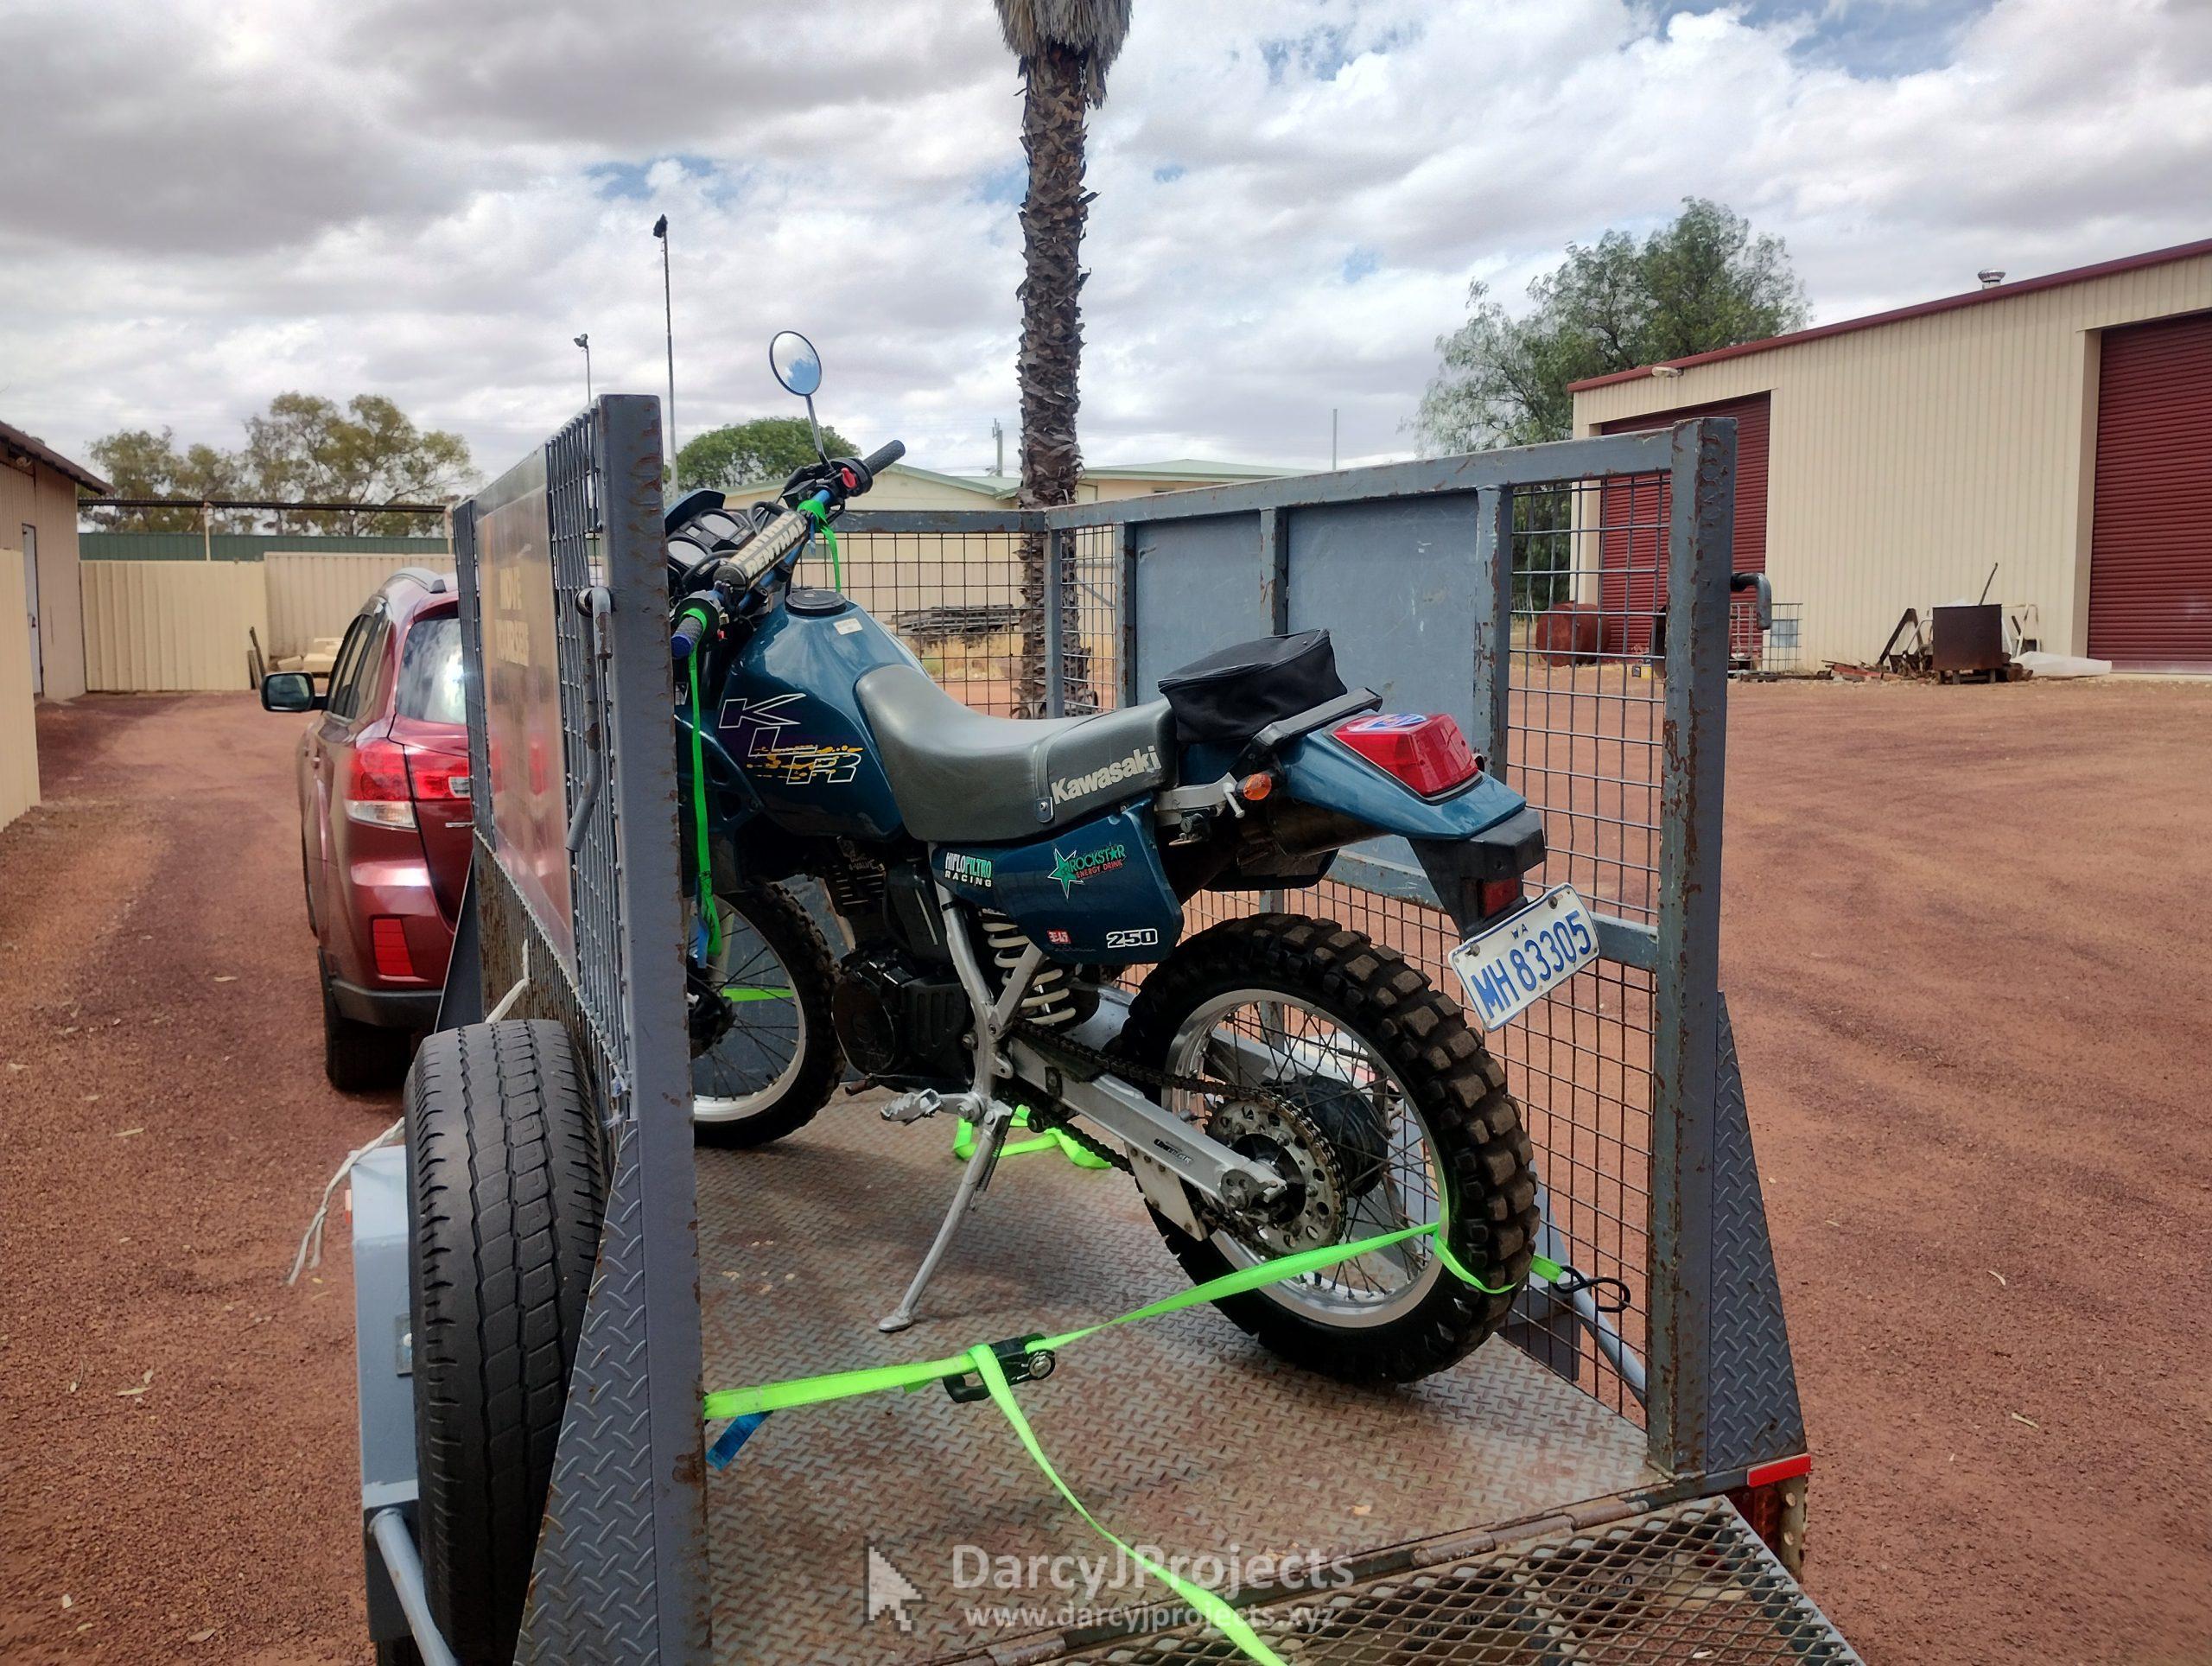 Protected: The Kawasaki KLR250 – My next adventure on two wheels